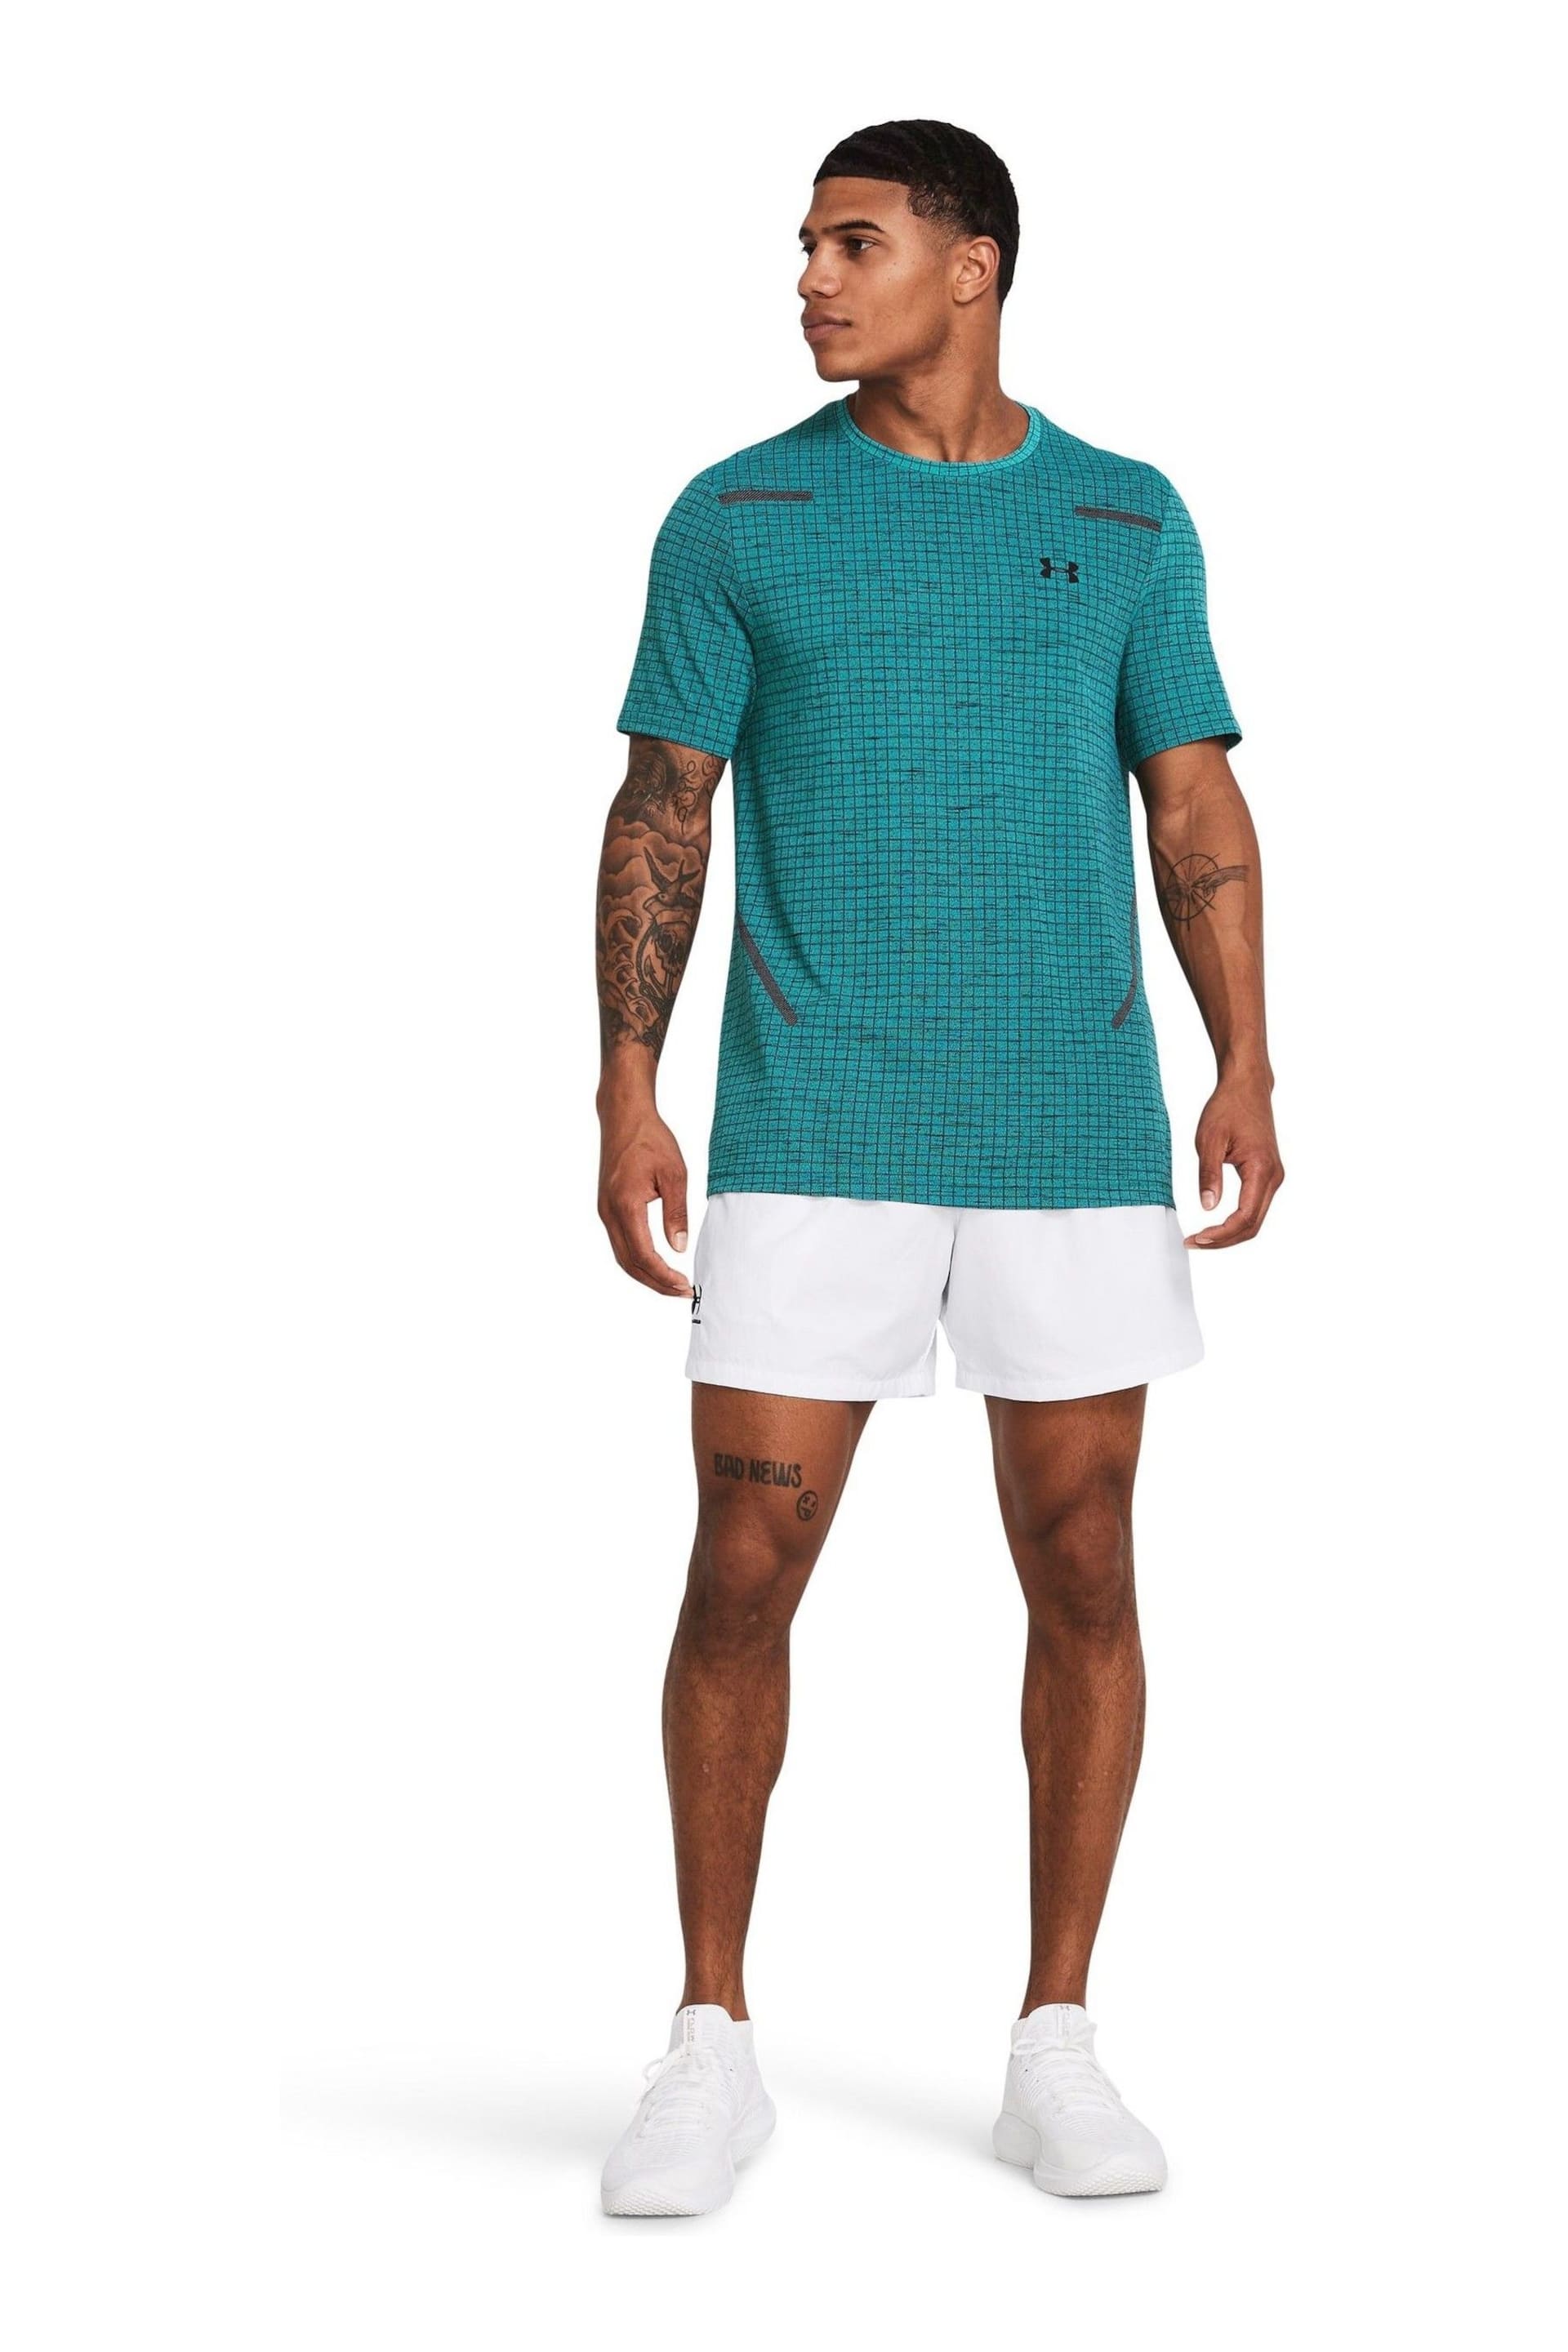 Under Armour Teal Blue Vanish Seamless Short Sleeve T-Shirt - Image 3 of 8